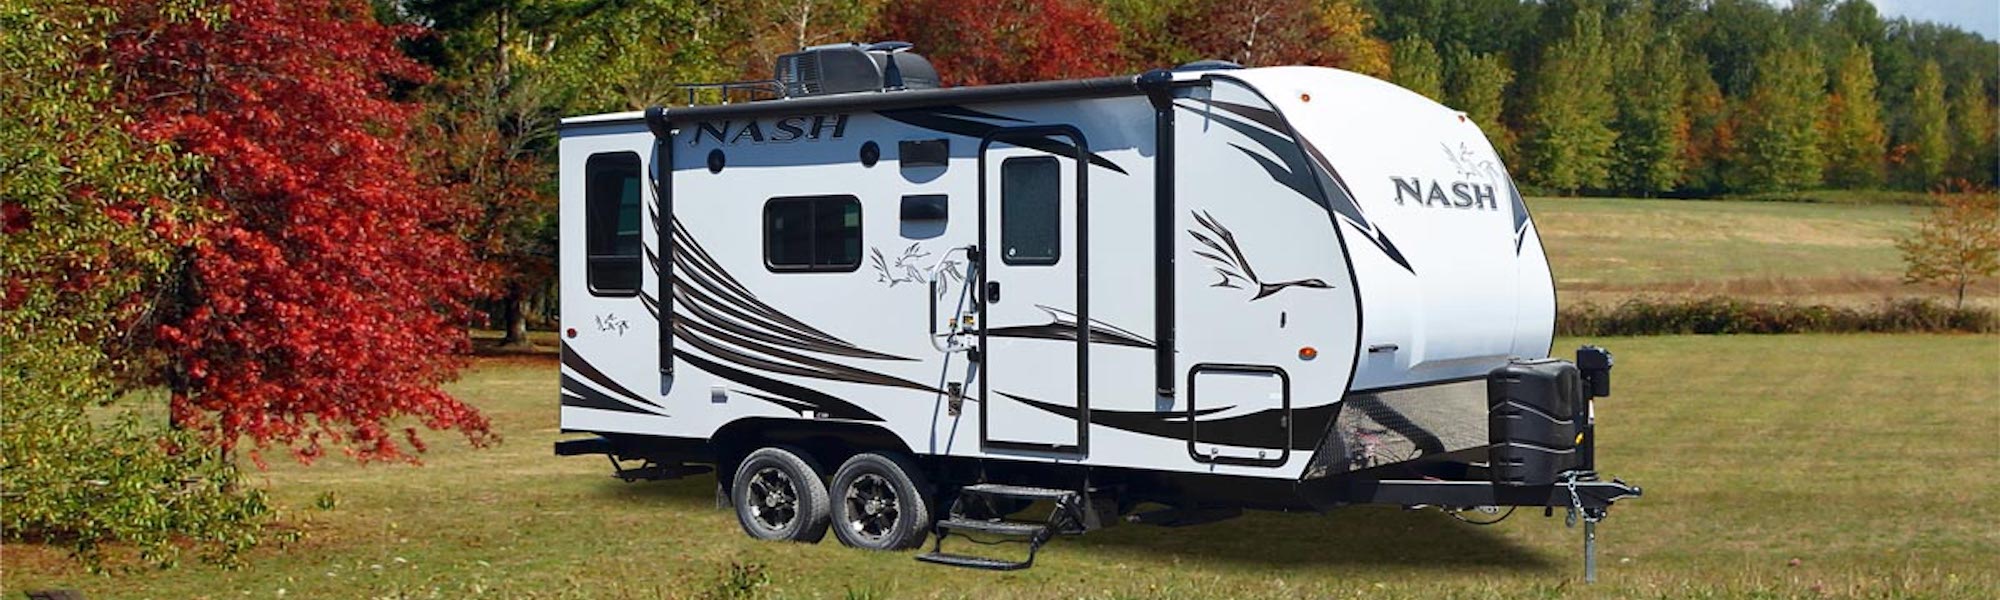 <a href=<img src="images/upload/October_2021/Northwood-Nash-Okanagan-BC.jpeg">alt="A 2021 grey, white, and black Northwood Nash travel trailer parked in a grassy field with colourful fall trees in the background."/></a>